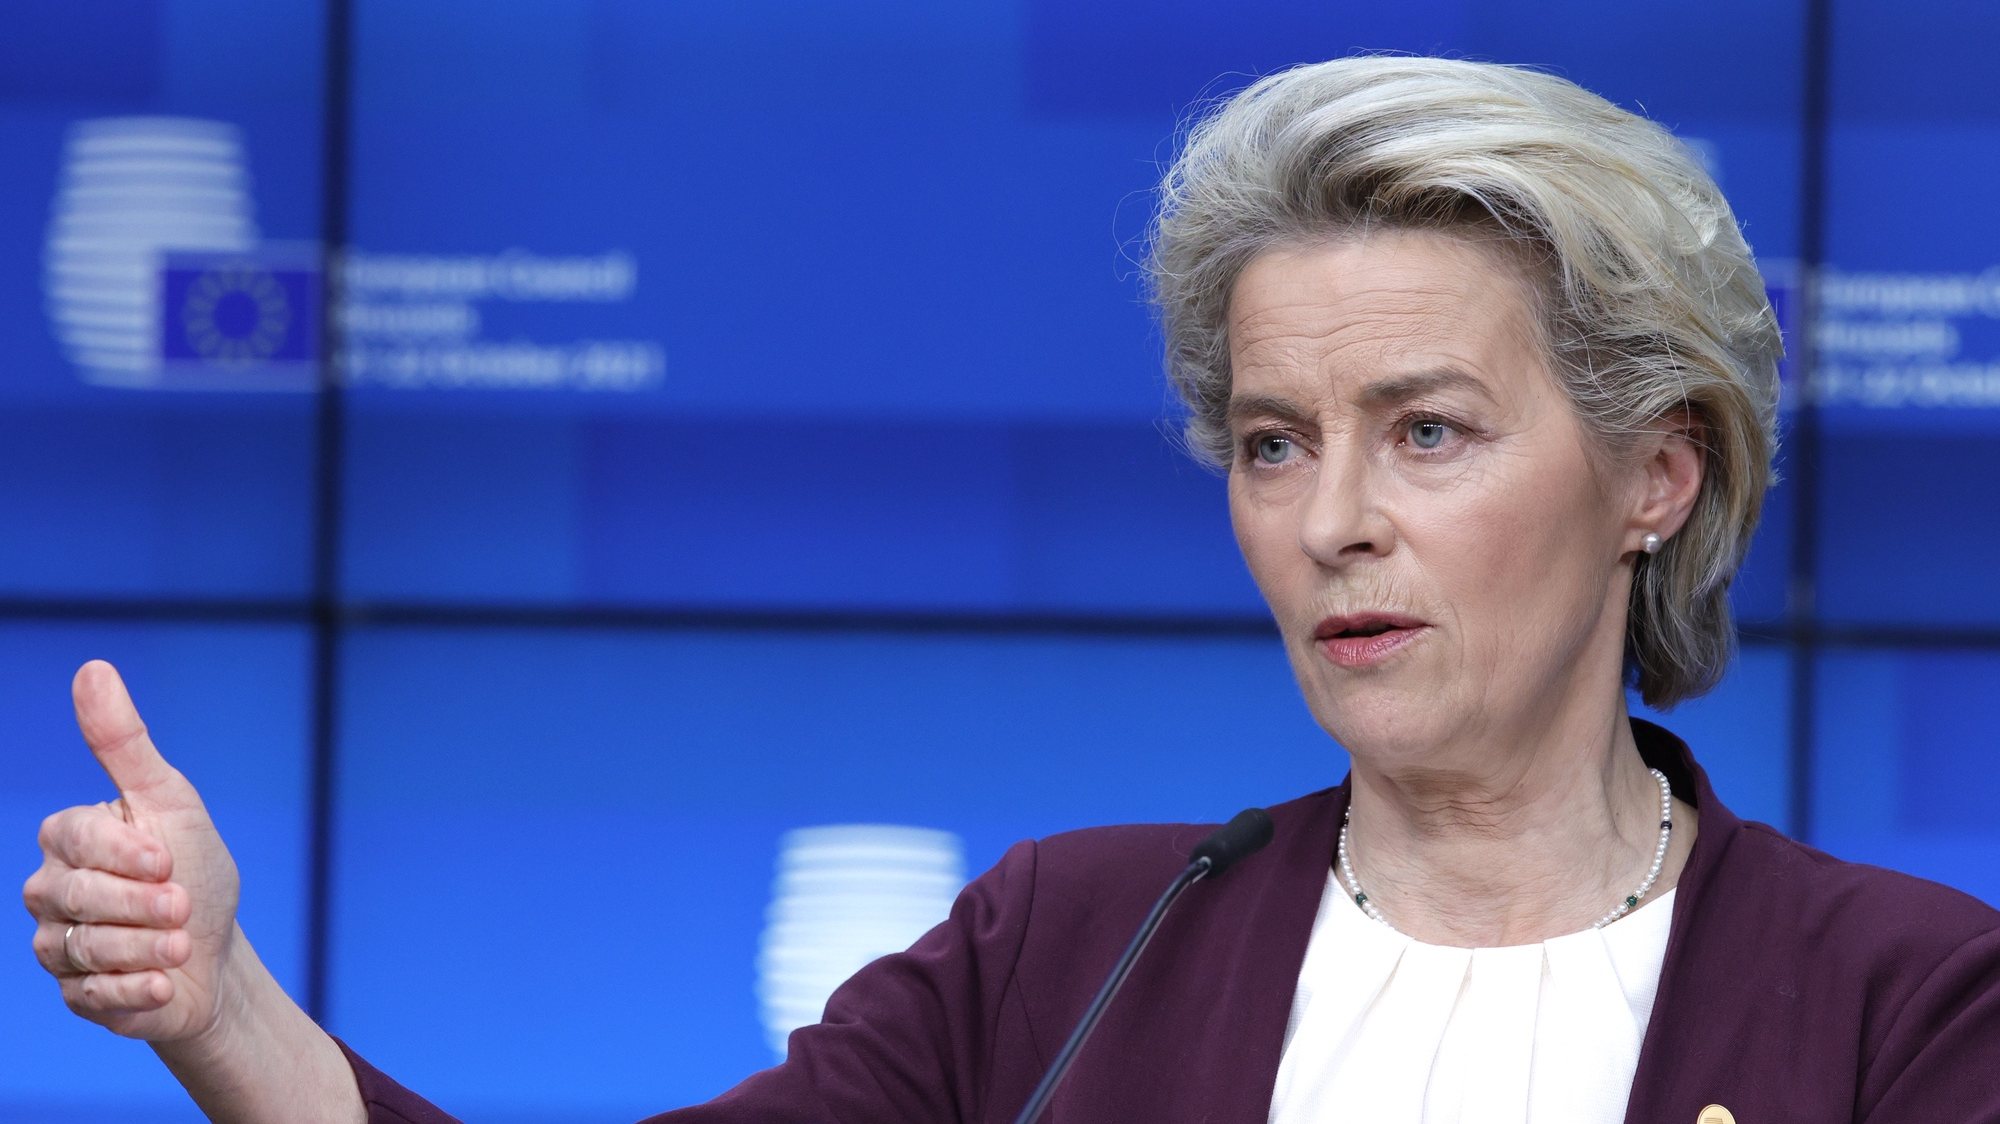 epa09539173 European Commission President Ursula von der Leyen speaks during a media conference at an EU summit in Brussels, Belgium, 22 October 2021. European Union leaders concluded a two-day summit, on 22 October 2021, in which they discussed issues such as climate change, the energy crisis, COVID-19 developments and migration.  EPA/Olivier Matthys / POOL